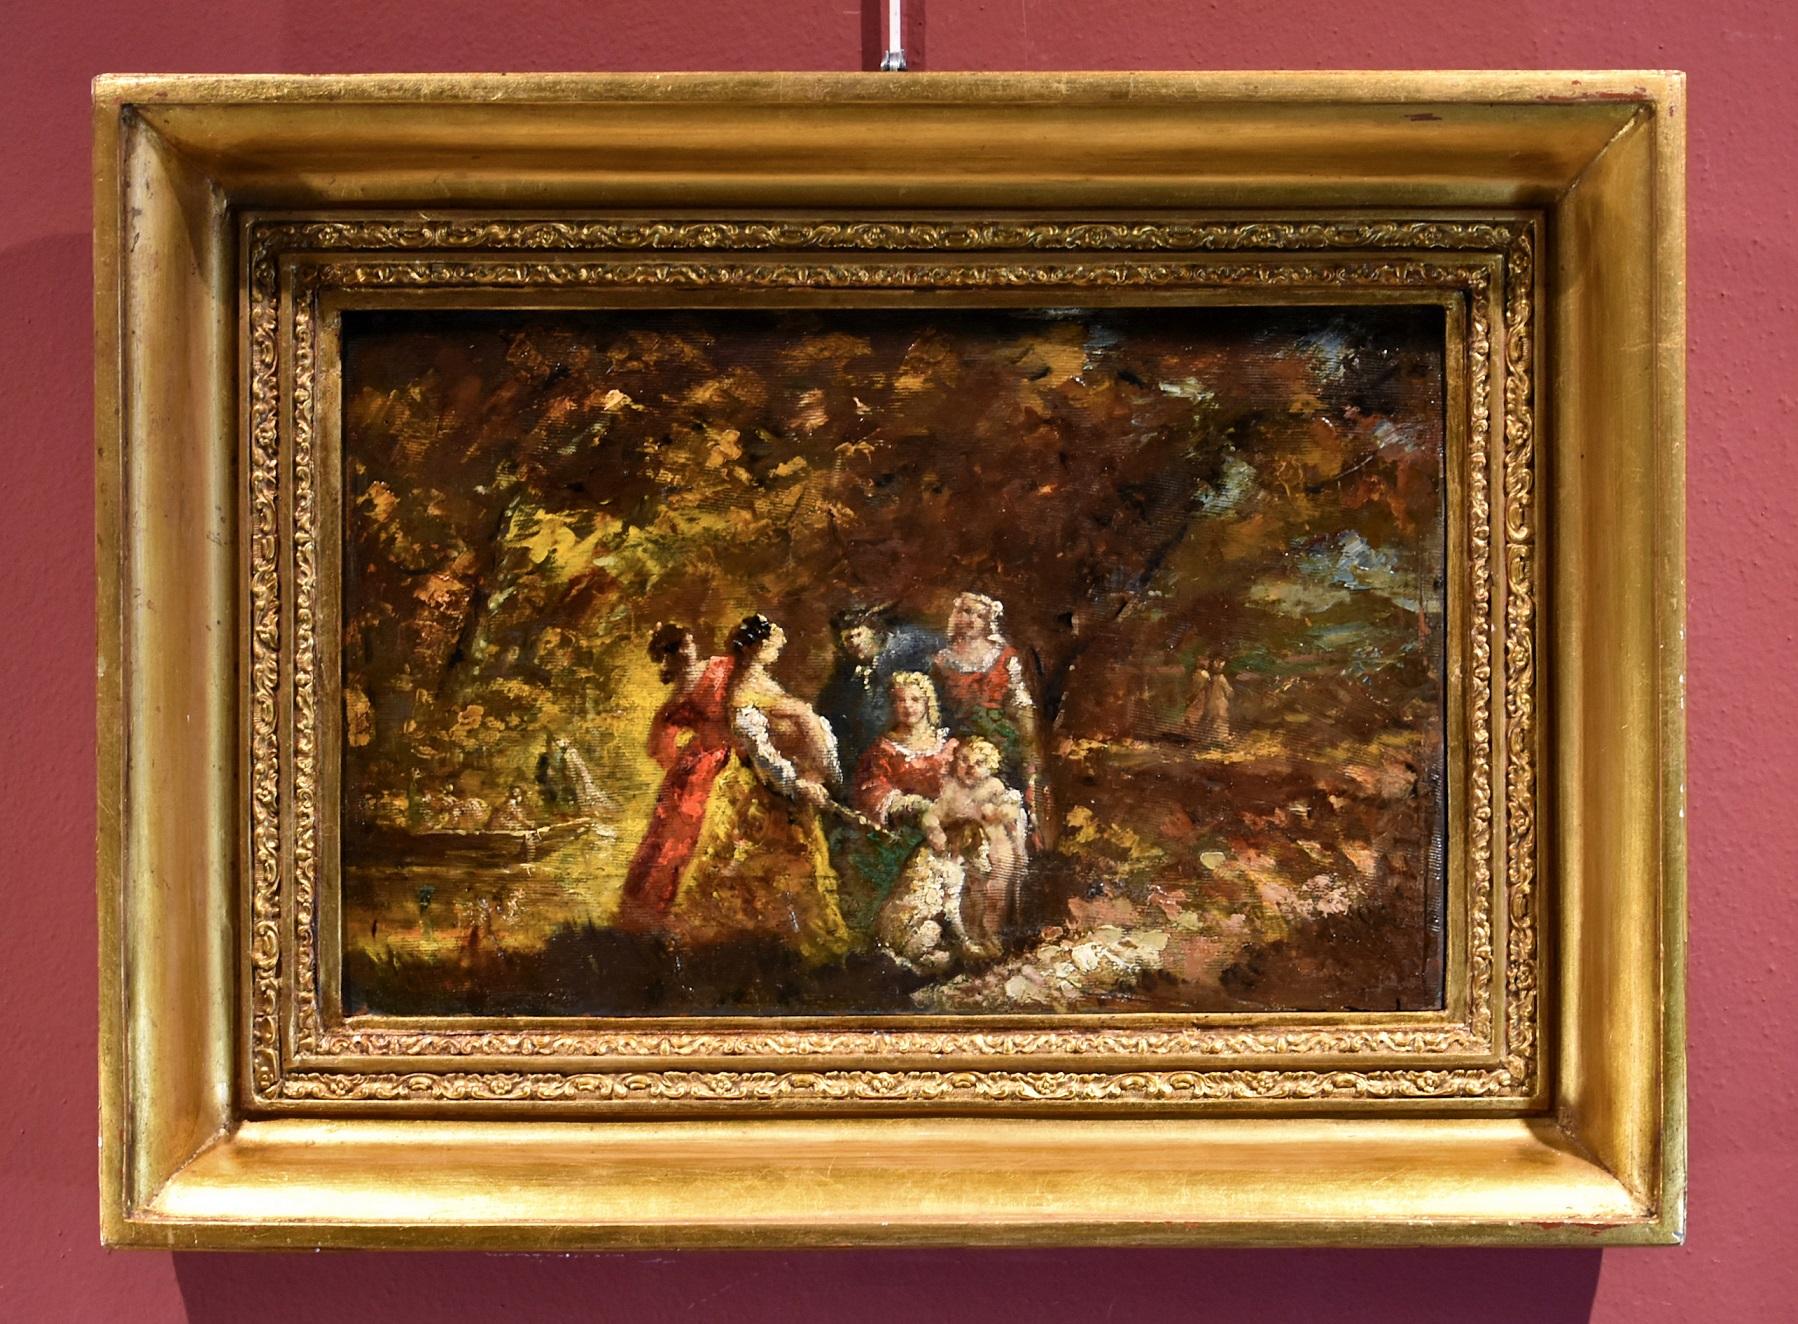 Garden Landscape Monticelli Signed Paint Oil on table 19th Century France - Impressionist Painting by Adolphe Joseph Thomas Monticelli (Marseille 1824 - ivi 1886)